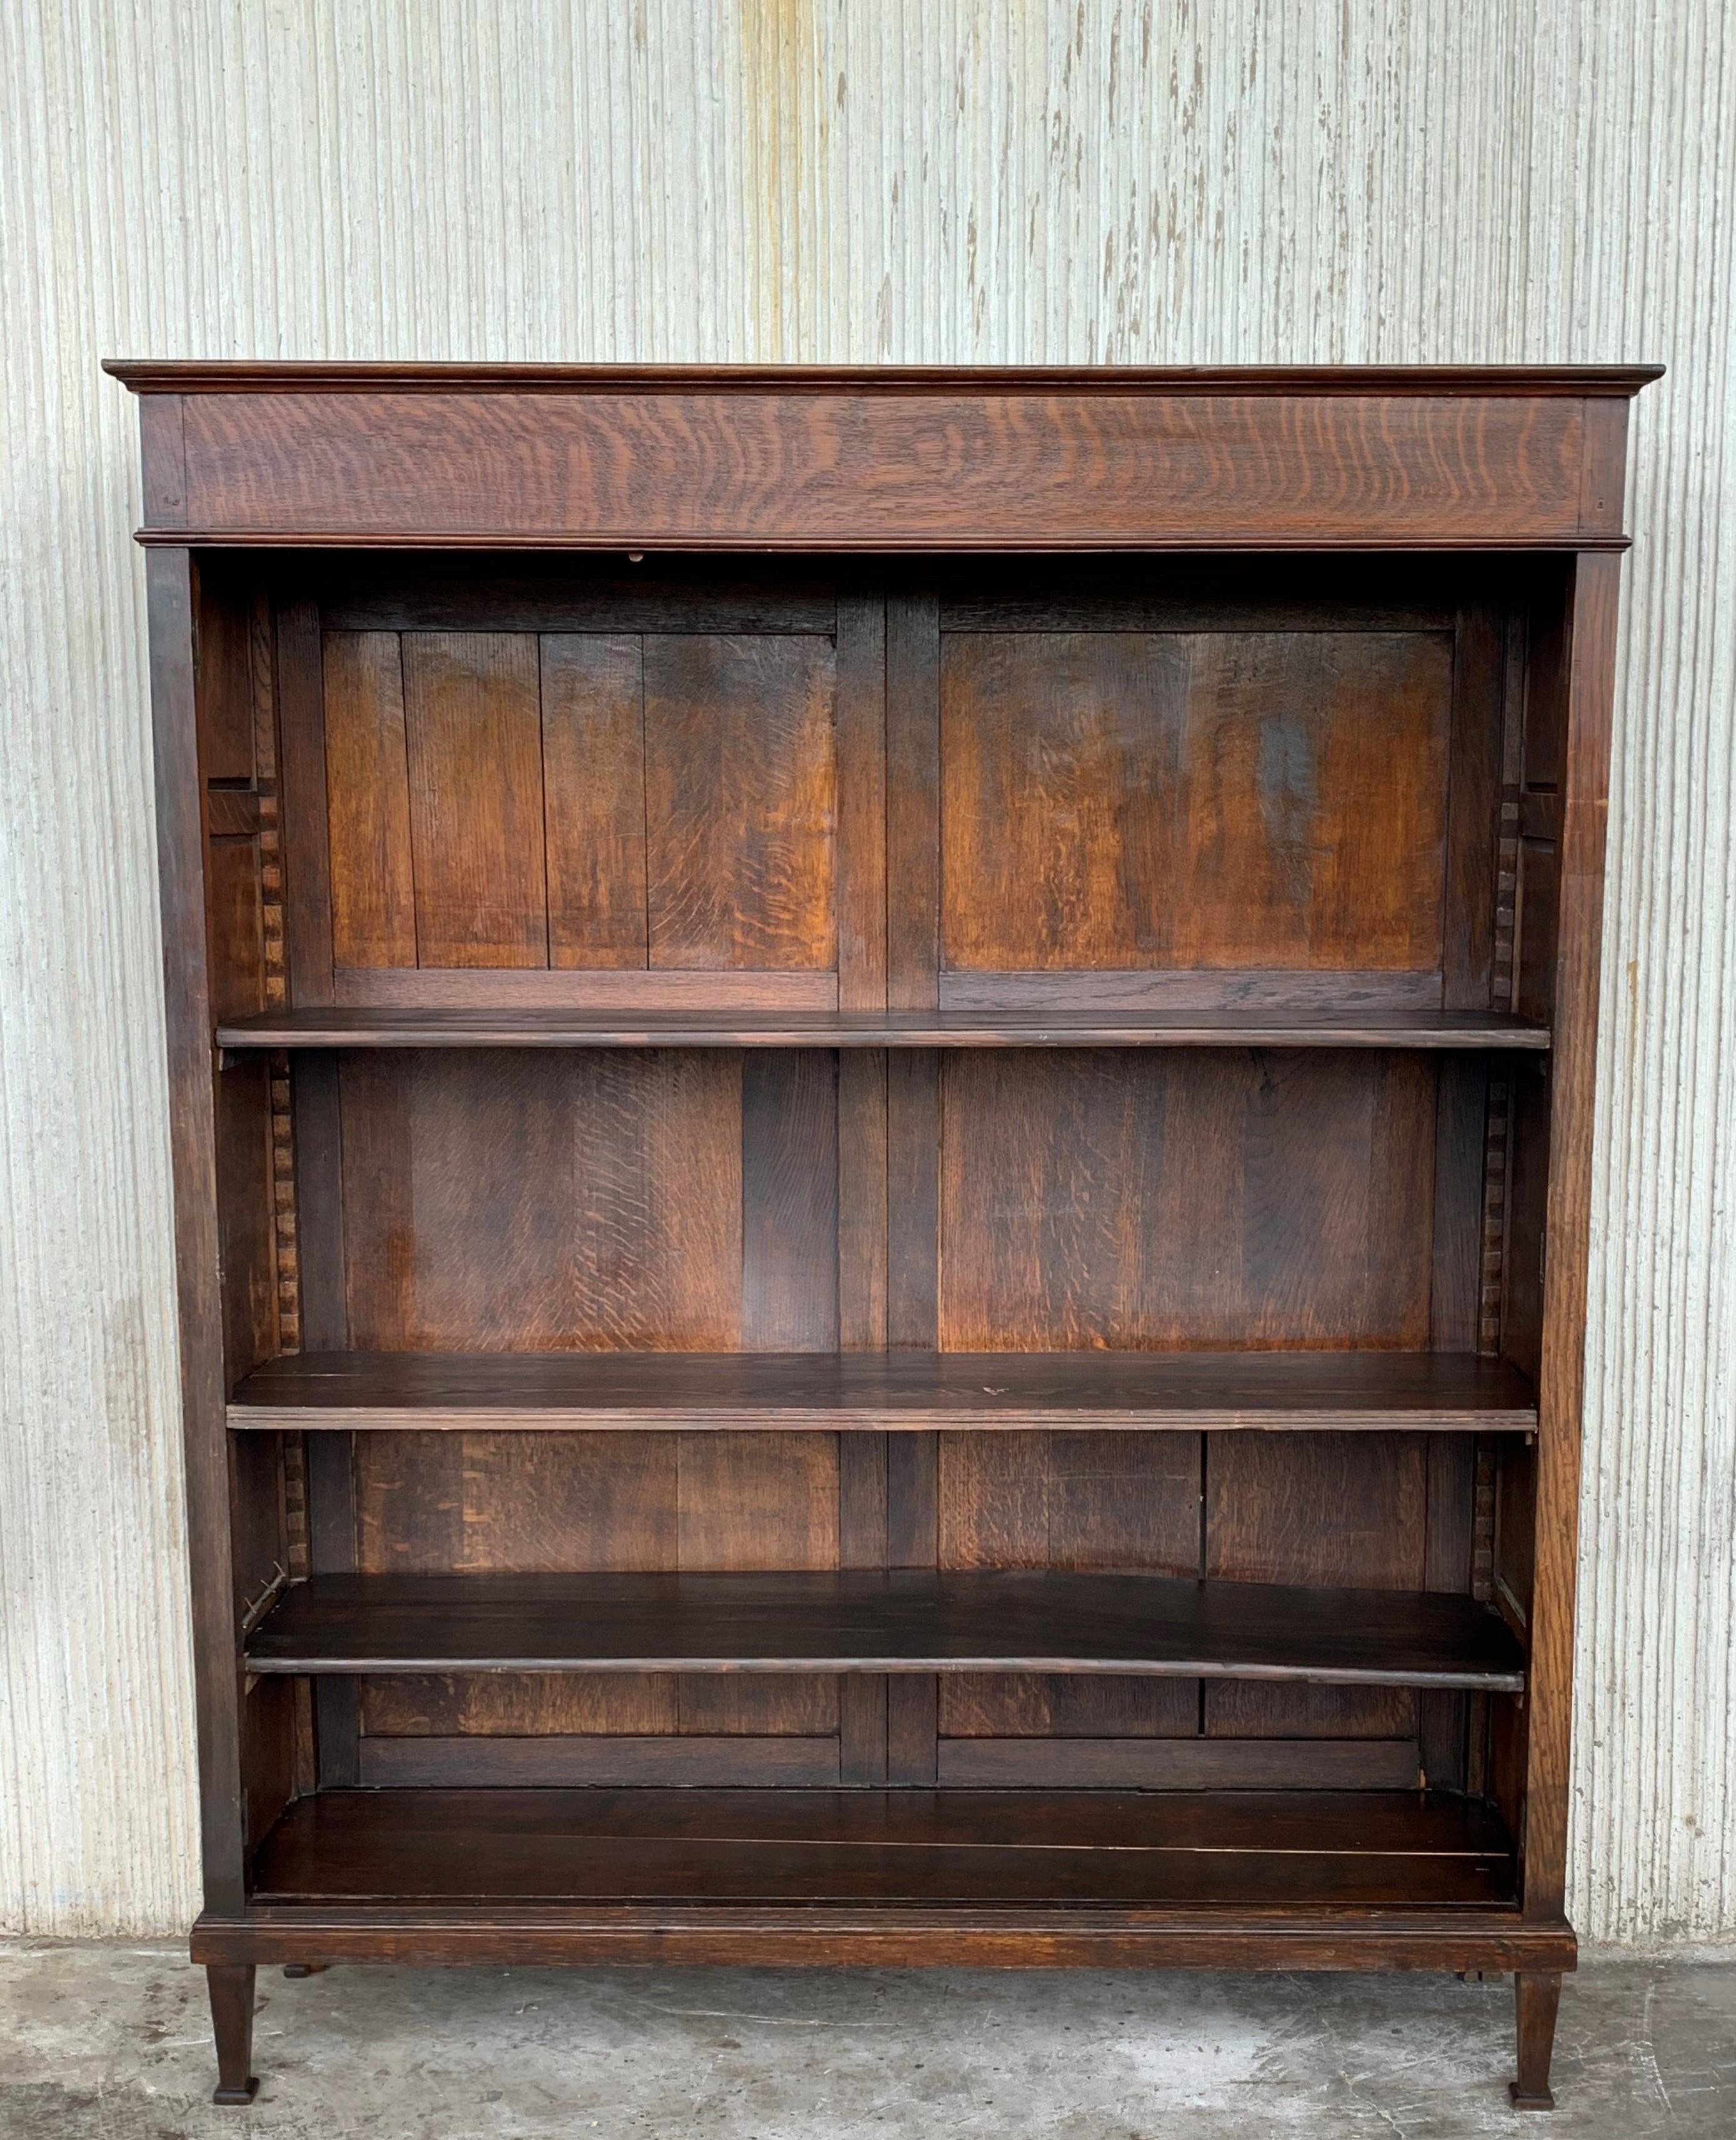 Long antique Victorian open bookcase in walnut with independent adjustable shelves.

This bookcase is very fine quality and a practicable piece of furniture. It’s a Classic looking Victorian item of furniture and dates from circa 1860s-1880s